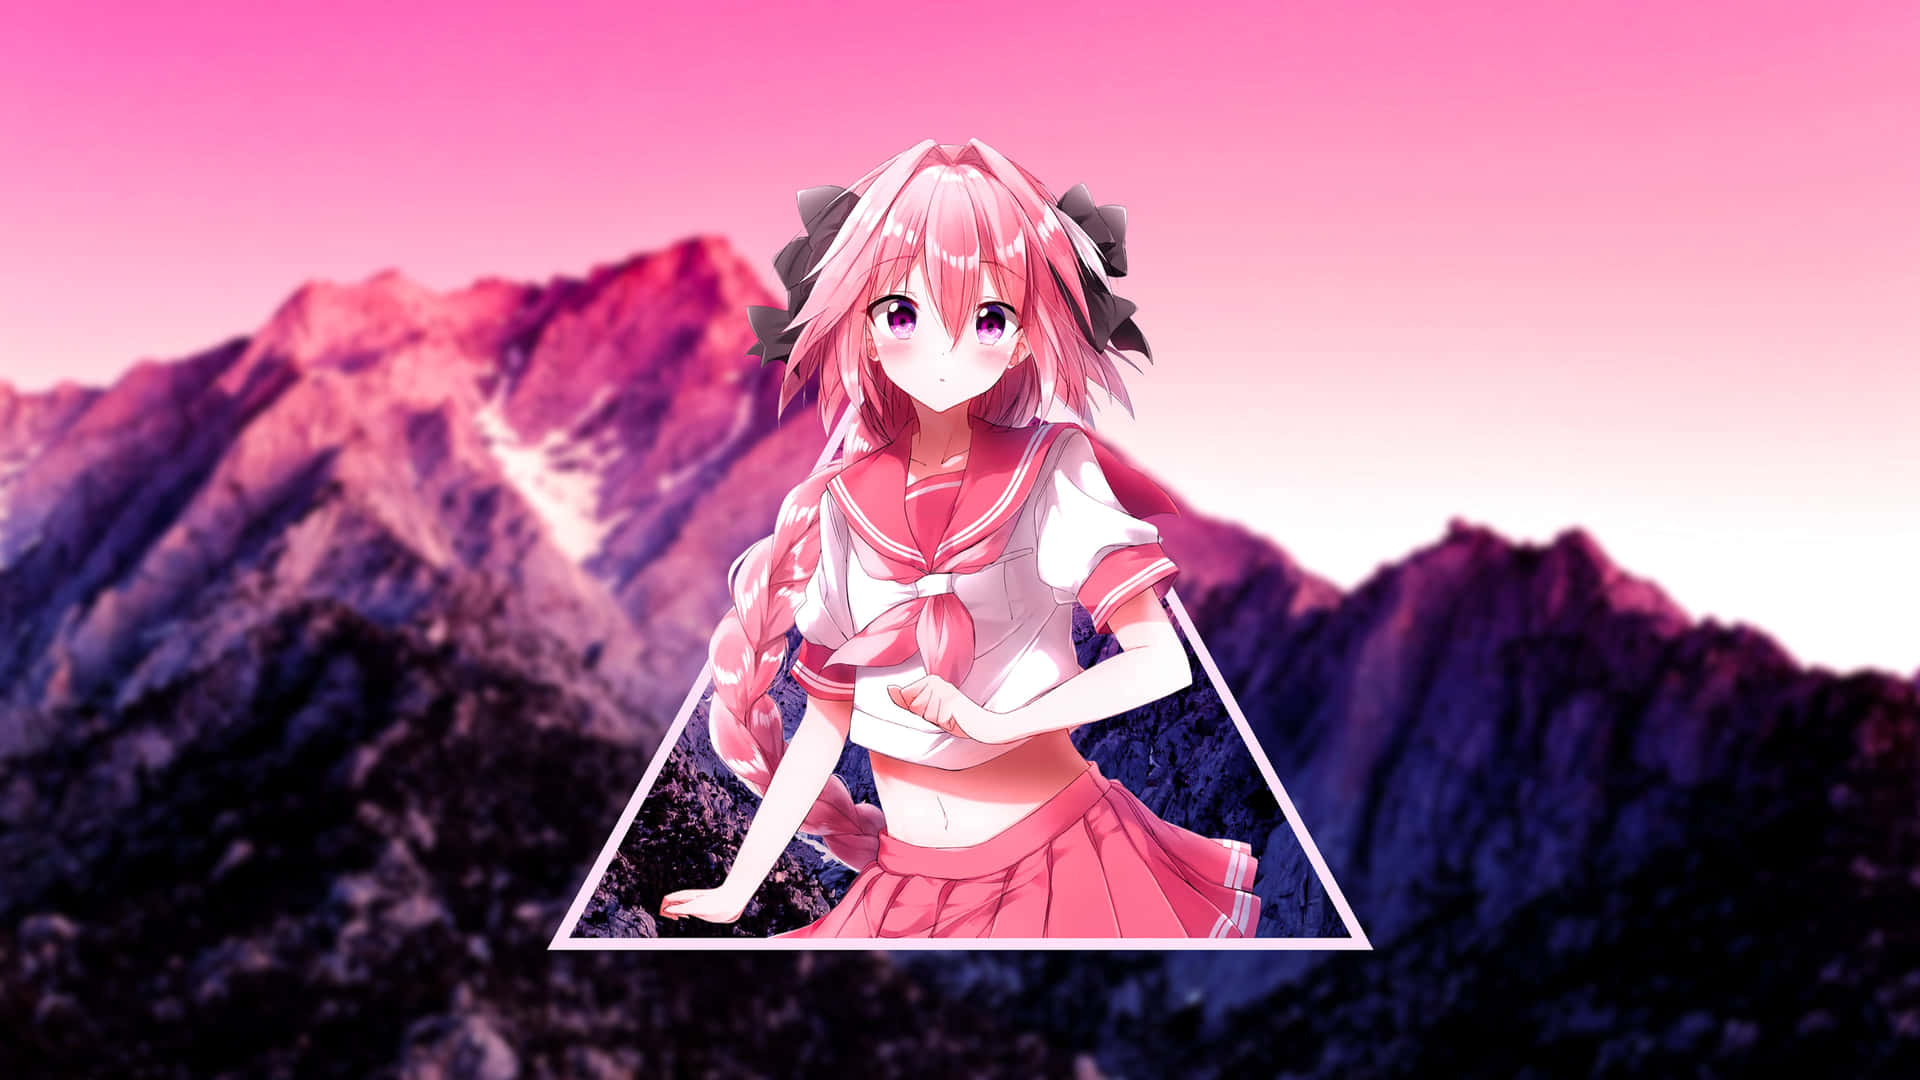 Featuring Astolfo, the Hero of the 12 Paladins of Charlemagne